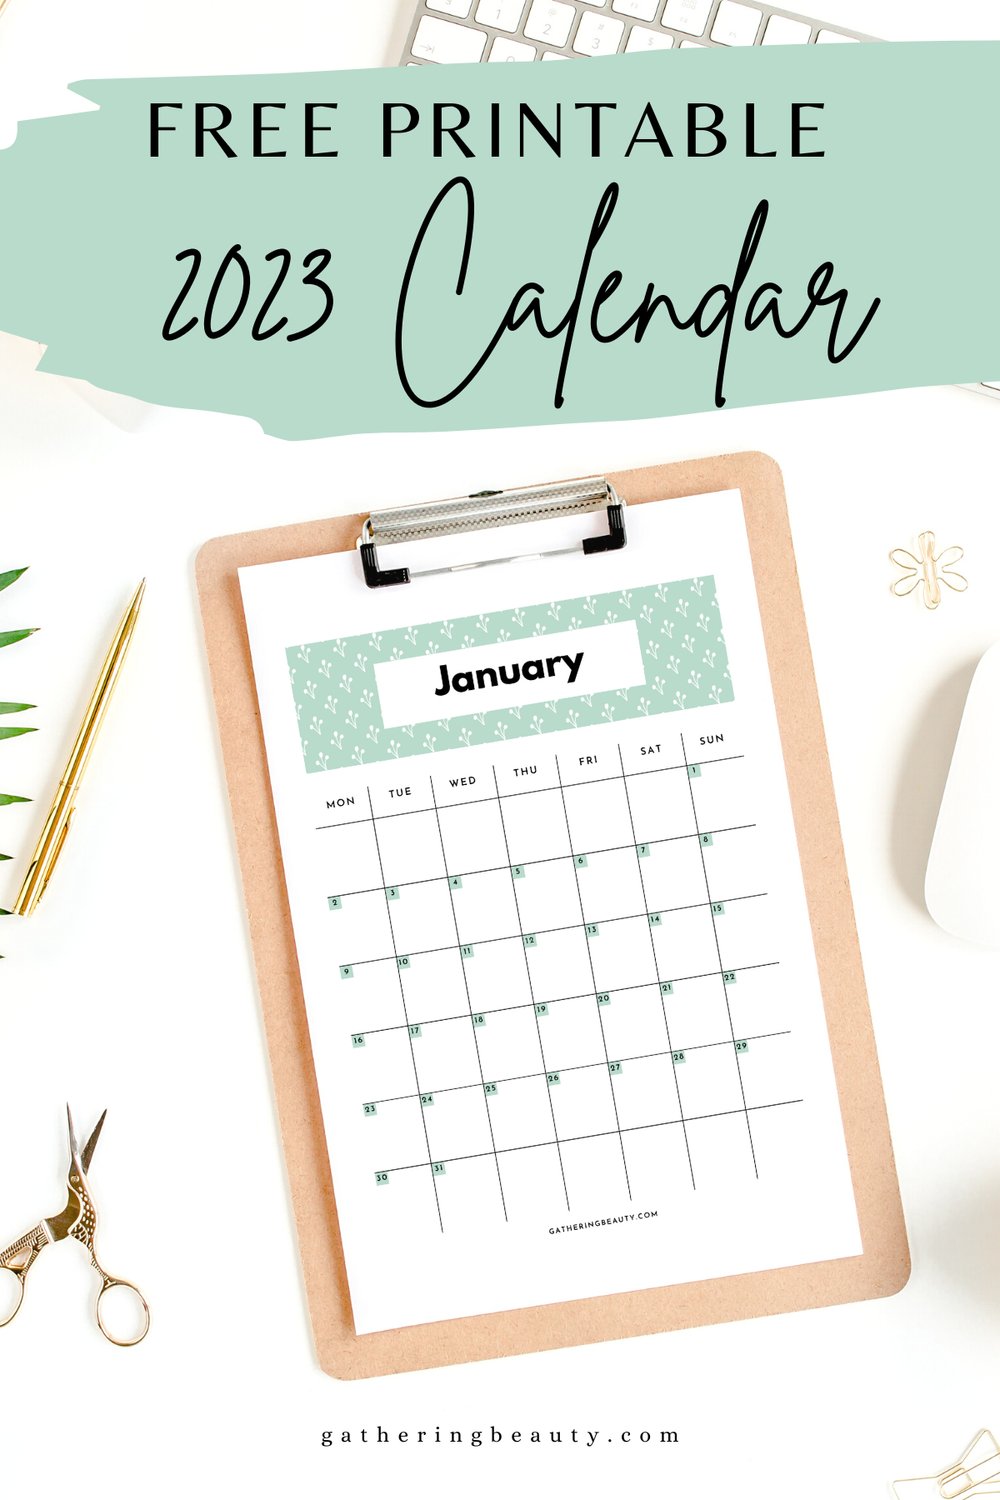 Free Calendar By Mail 2023